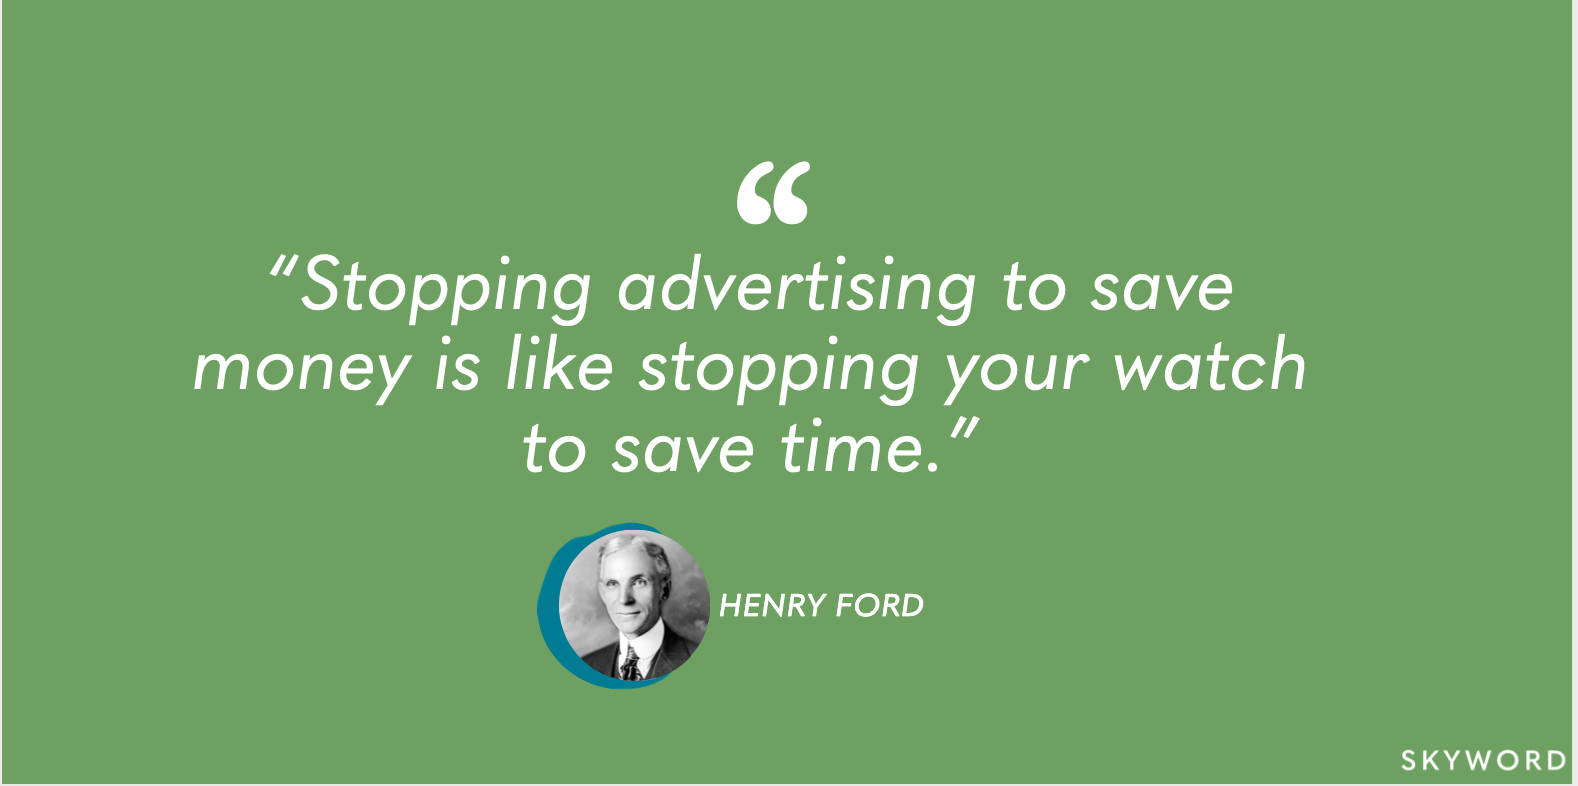 365 Marketing Quotes to Keep You Fired Up All Year